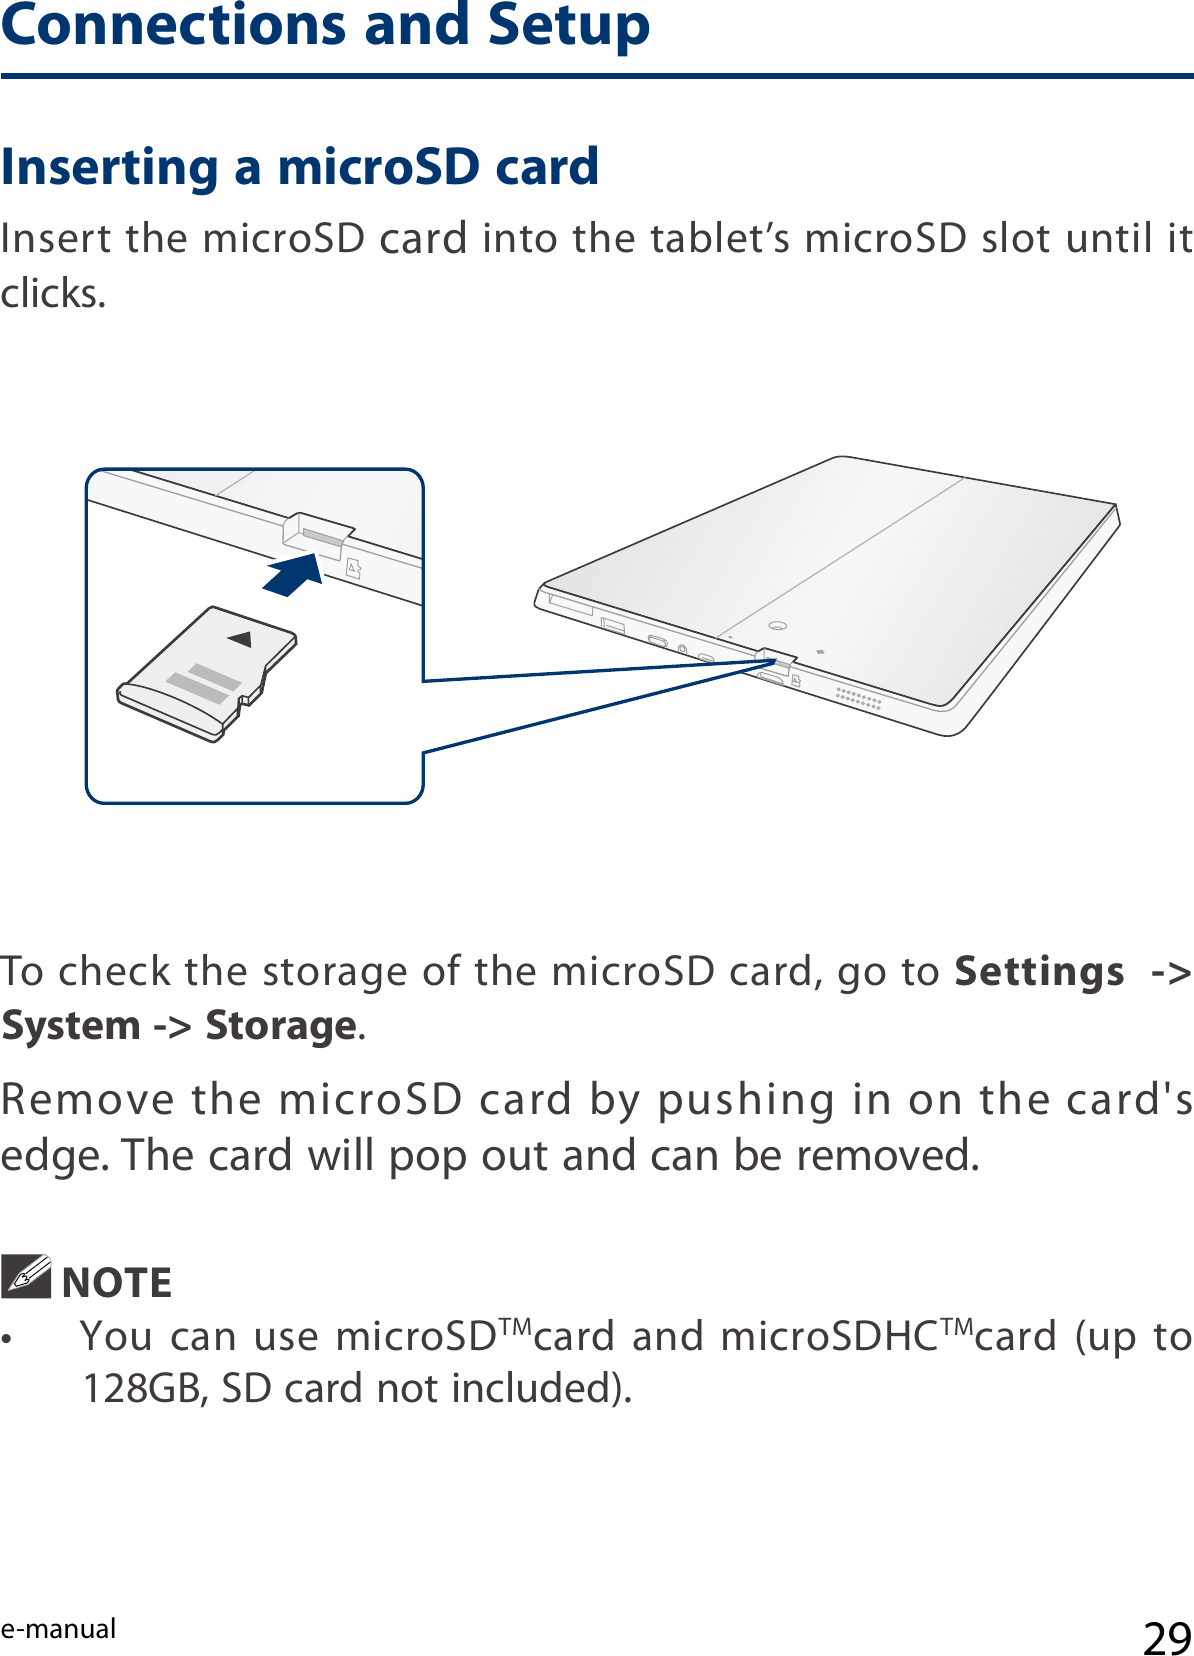 e-manual 29Inserting a microSD cardInsert the microSD card into the tablet’s microSD slot until it clicks.  NOTE•  You  can  use  microSDTMcard  and  microSDHCTMcard (up to 128GB, SD card not included). To check the storage of the microSD card, go to Settings  -&gt; System -&gt; Storage.Remove  the microSD card  by pushing  in  on the  card&apos;s edge. The card will pop out and can be removed.Connections and Setup